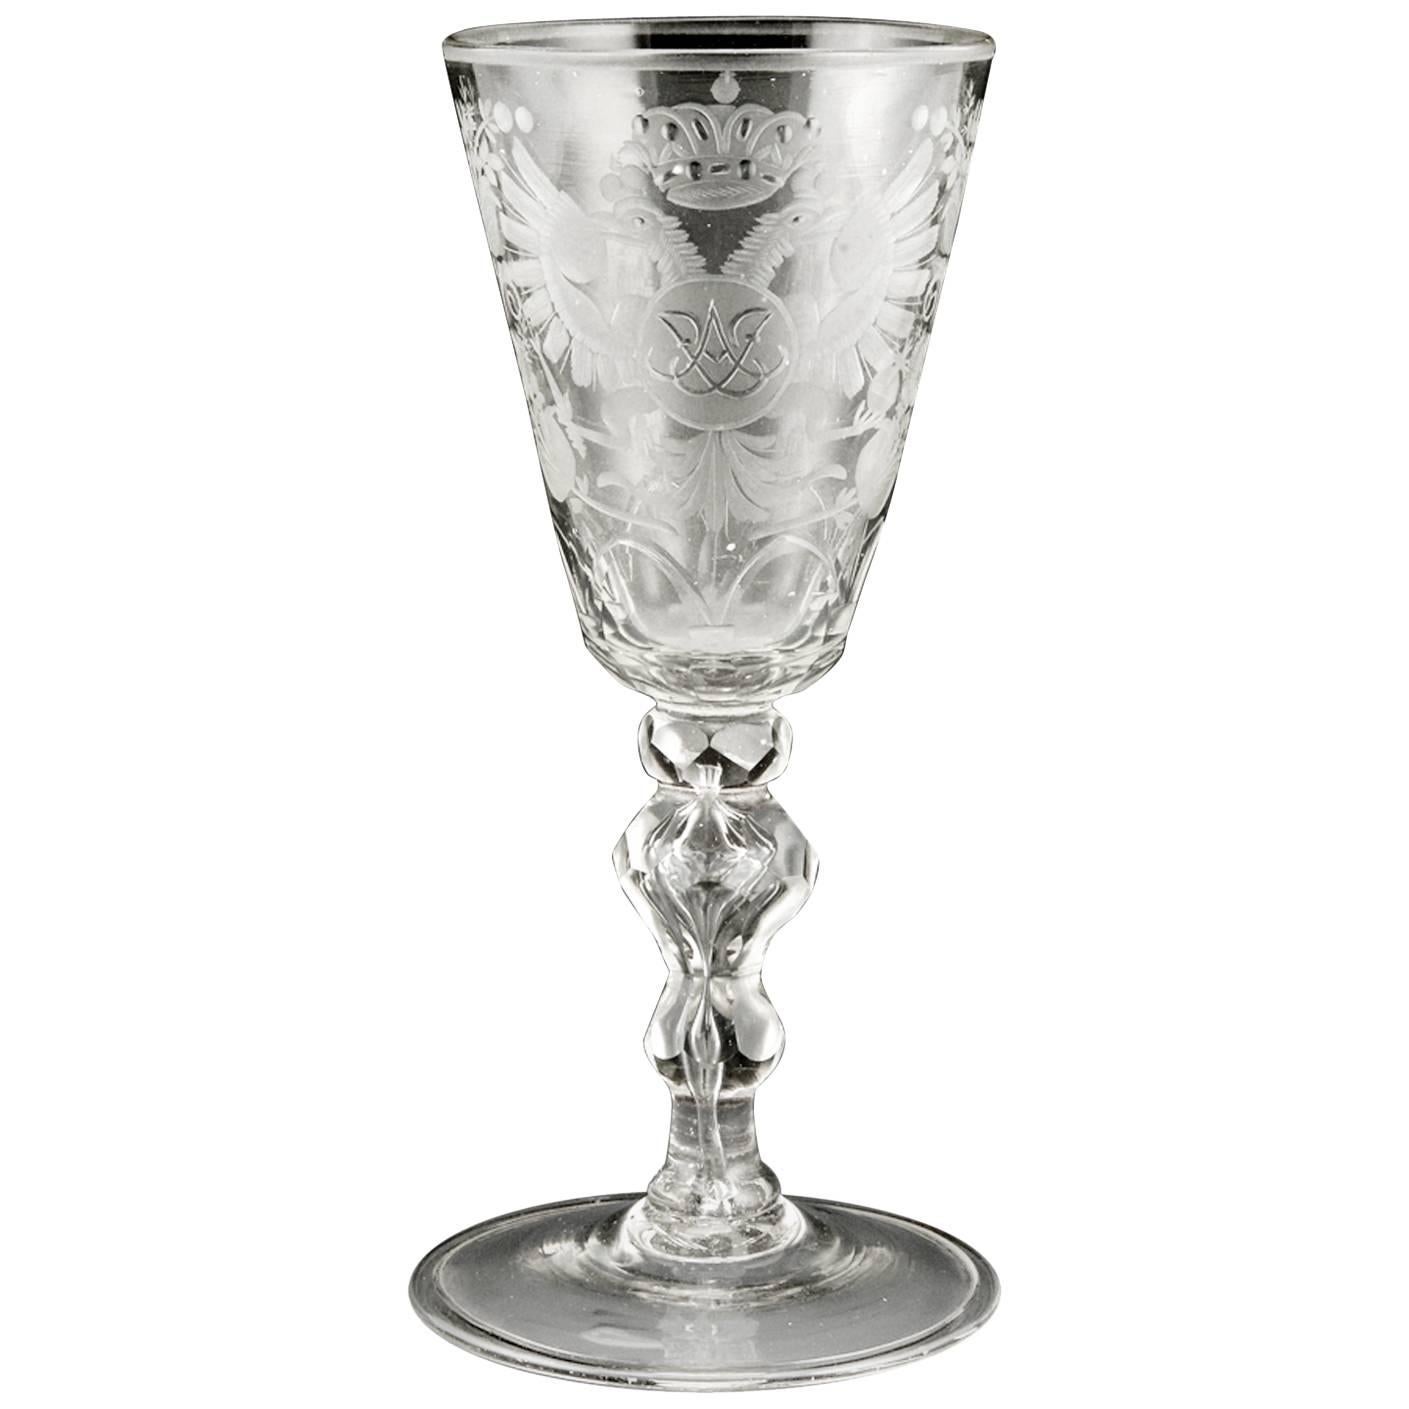 Early 18th Century Russian Engraved Empress Anna Goblet